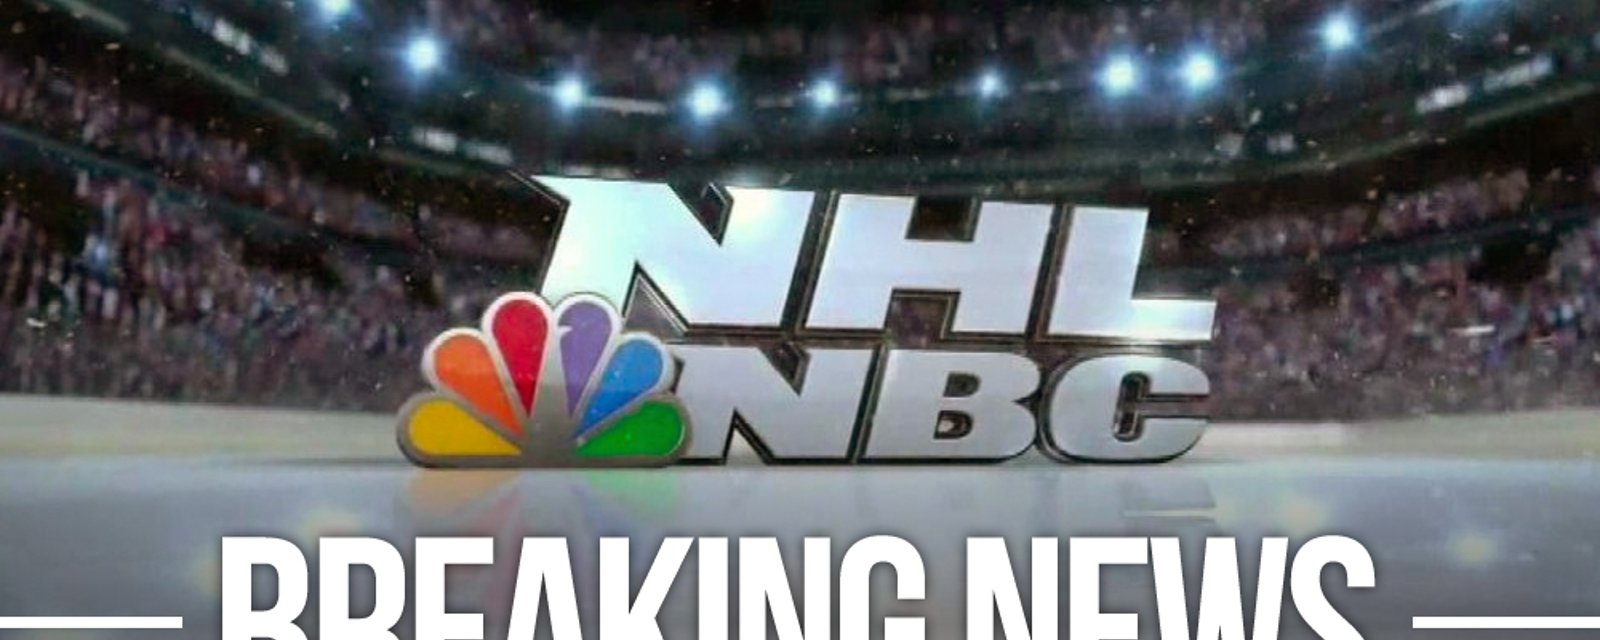 NBC is officially out as NHL broadcaster in the United States